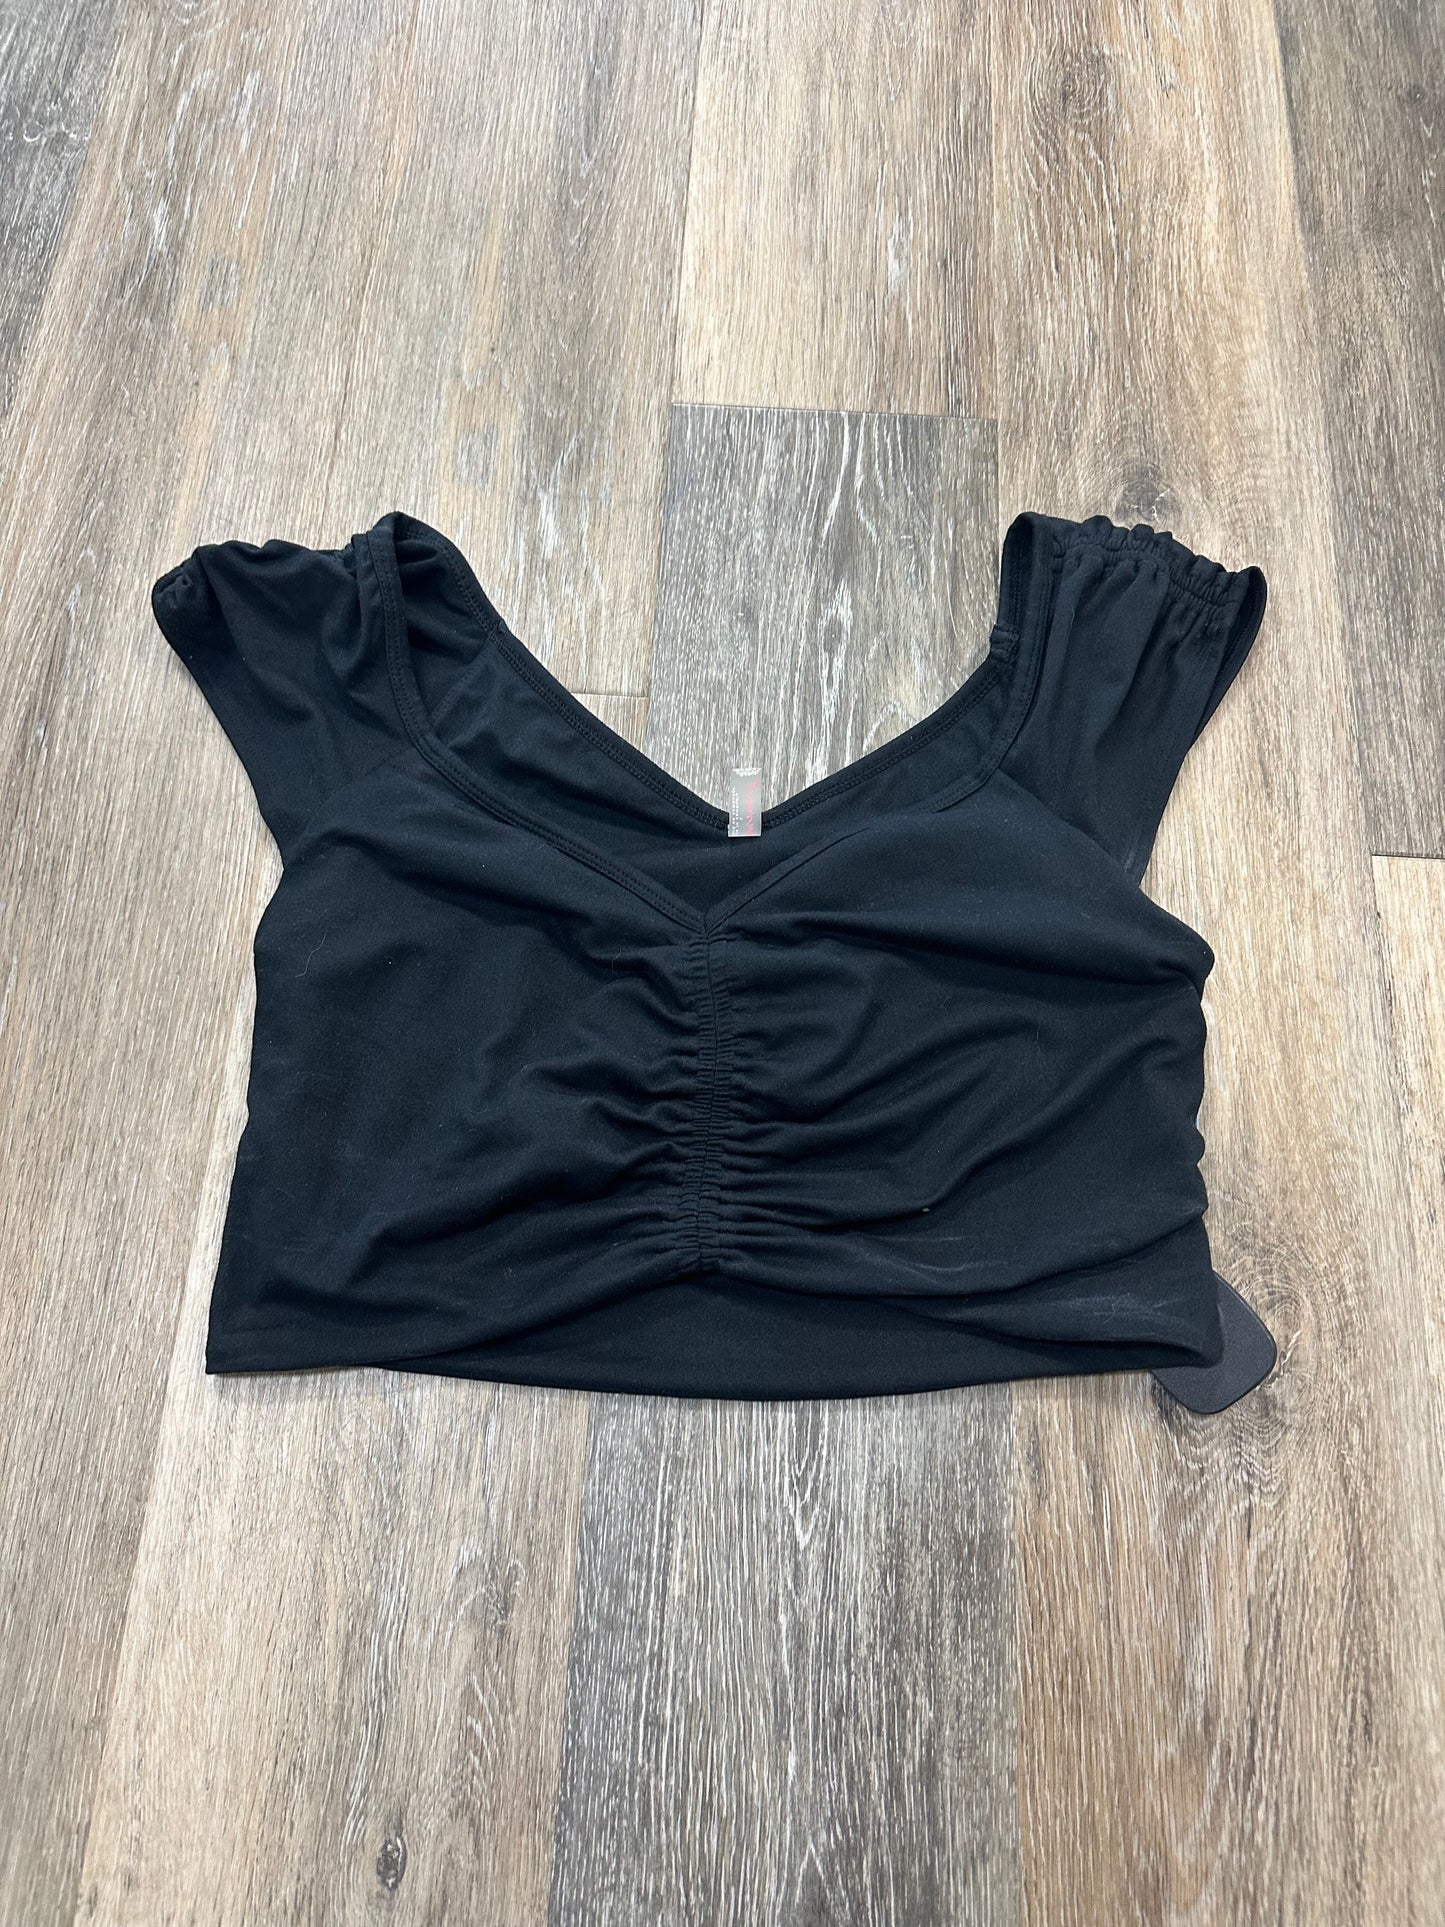 Black Top Short Sleeve Free People, Size L